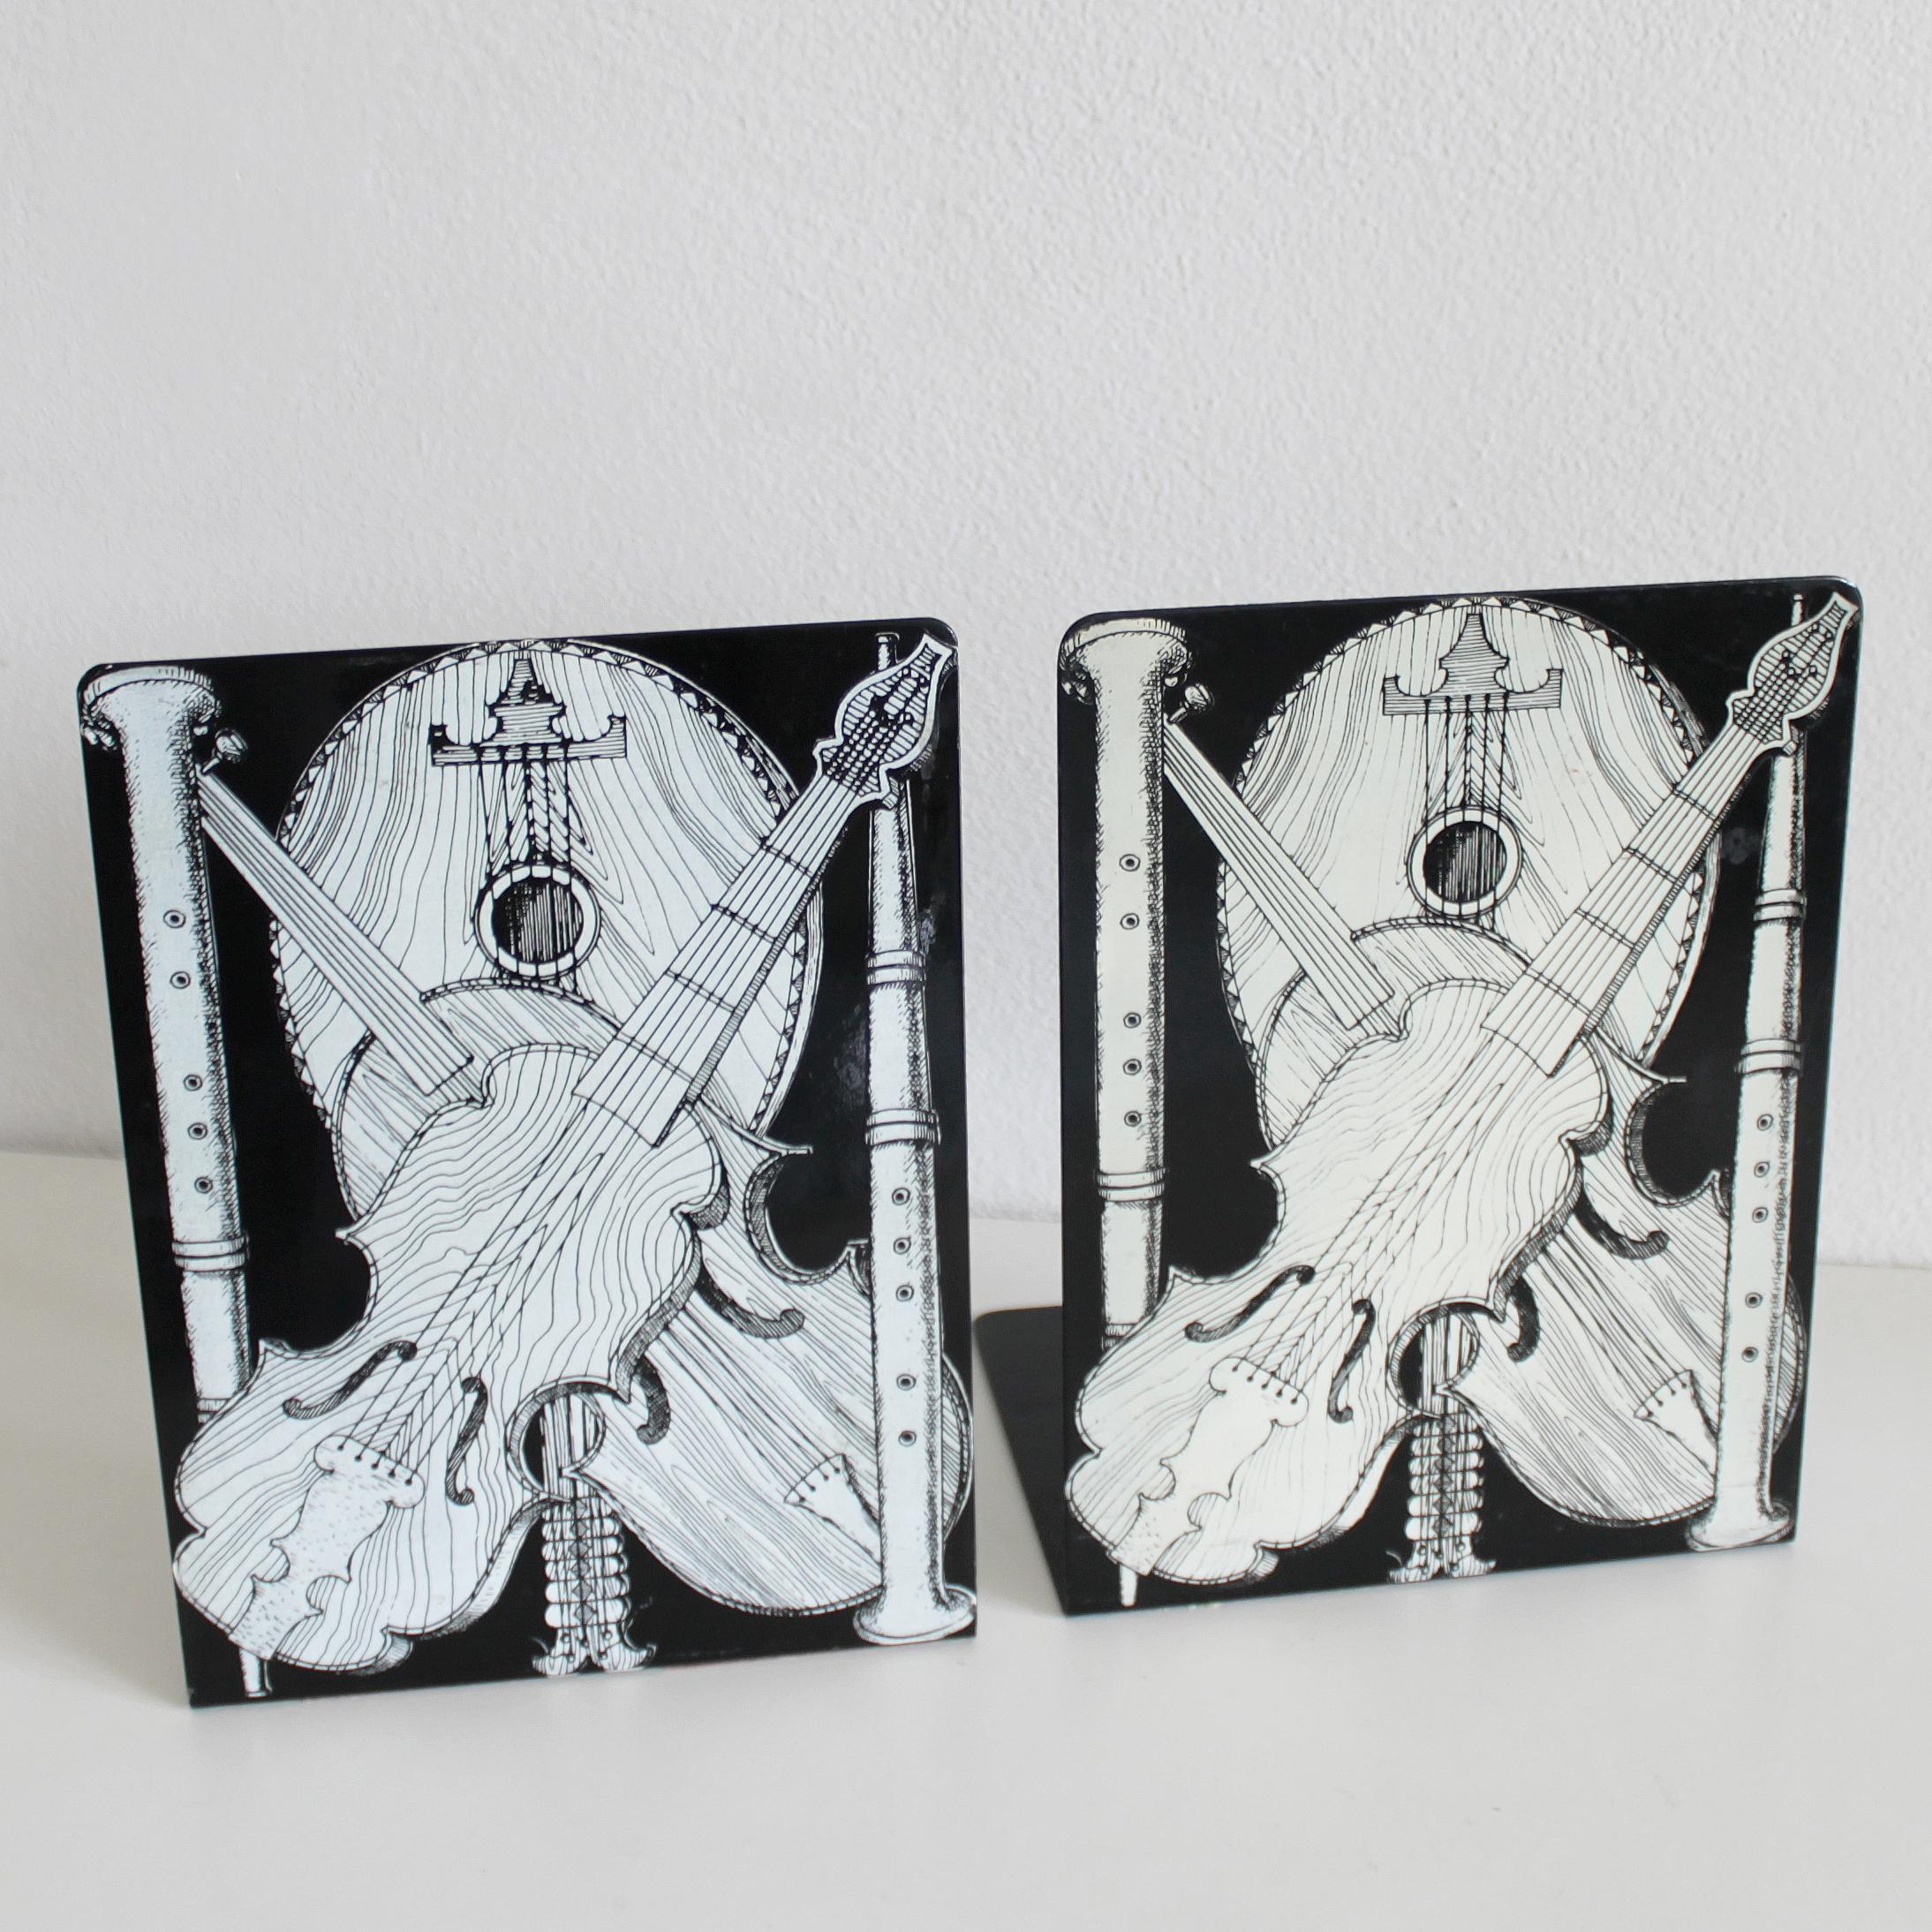 Mid-Century Modern Pair of Bookends 'Strumenti Musicali' by Piero Fornasetti, 1950-1960 For Sale